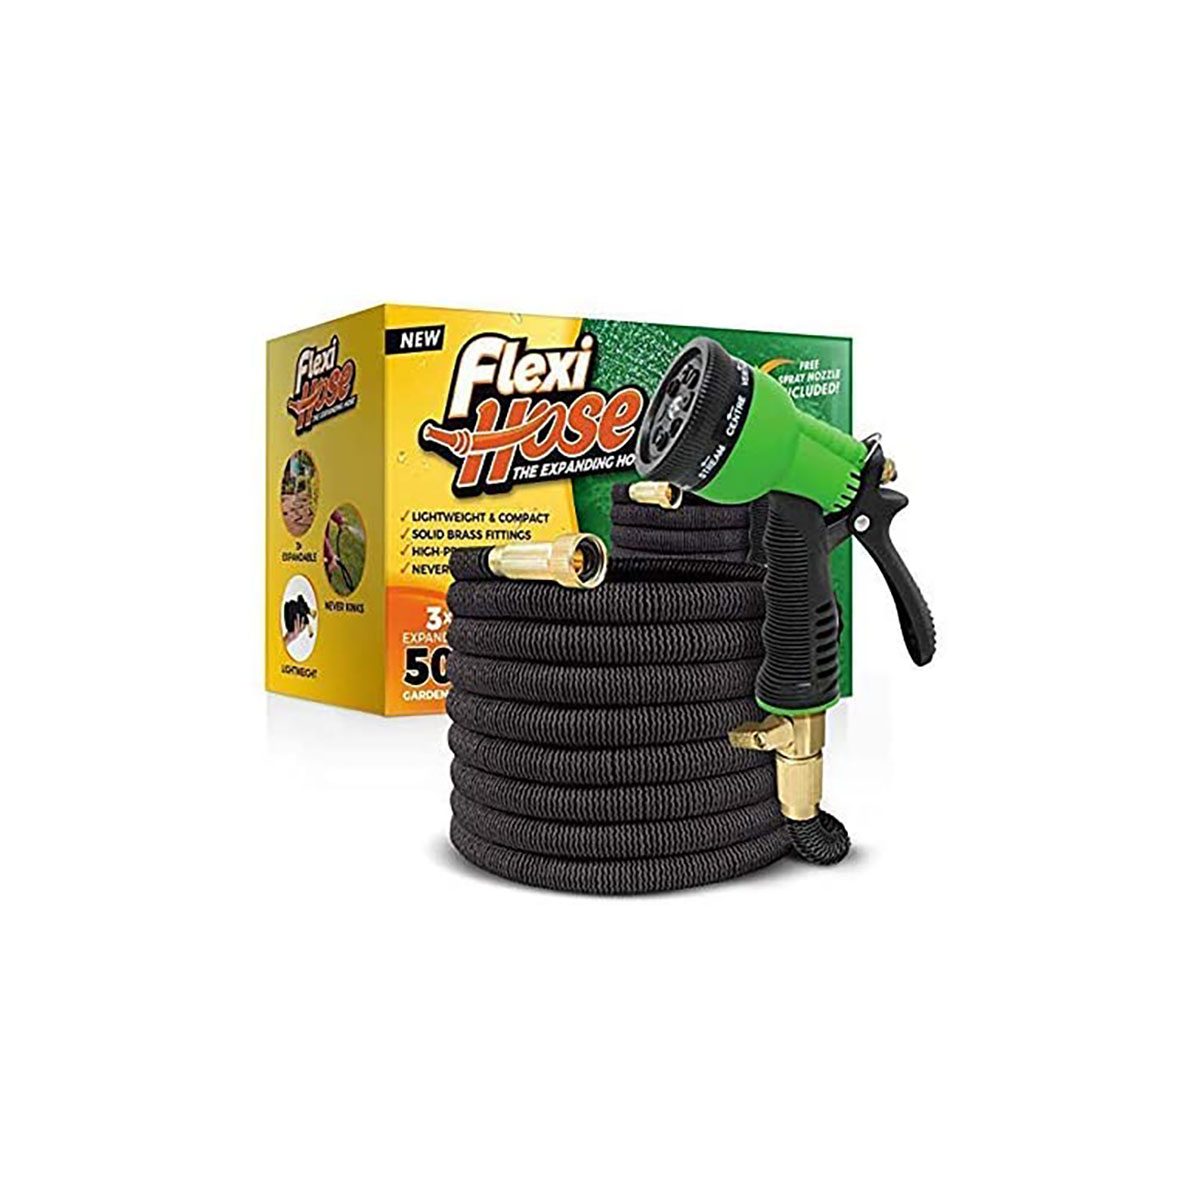 Hose and nozzle